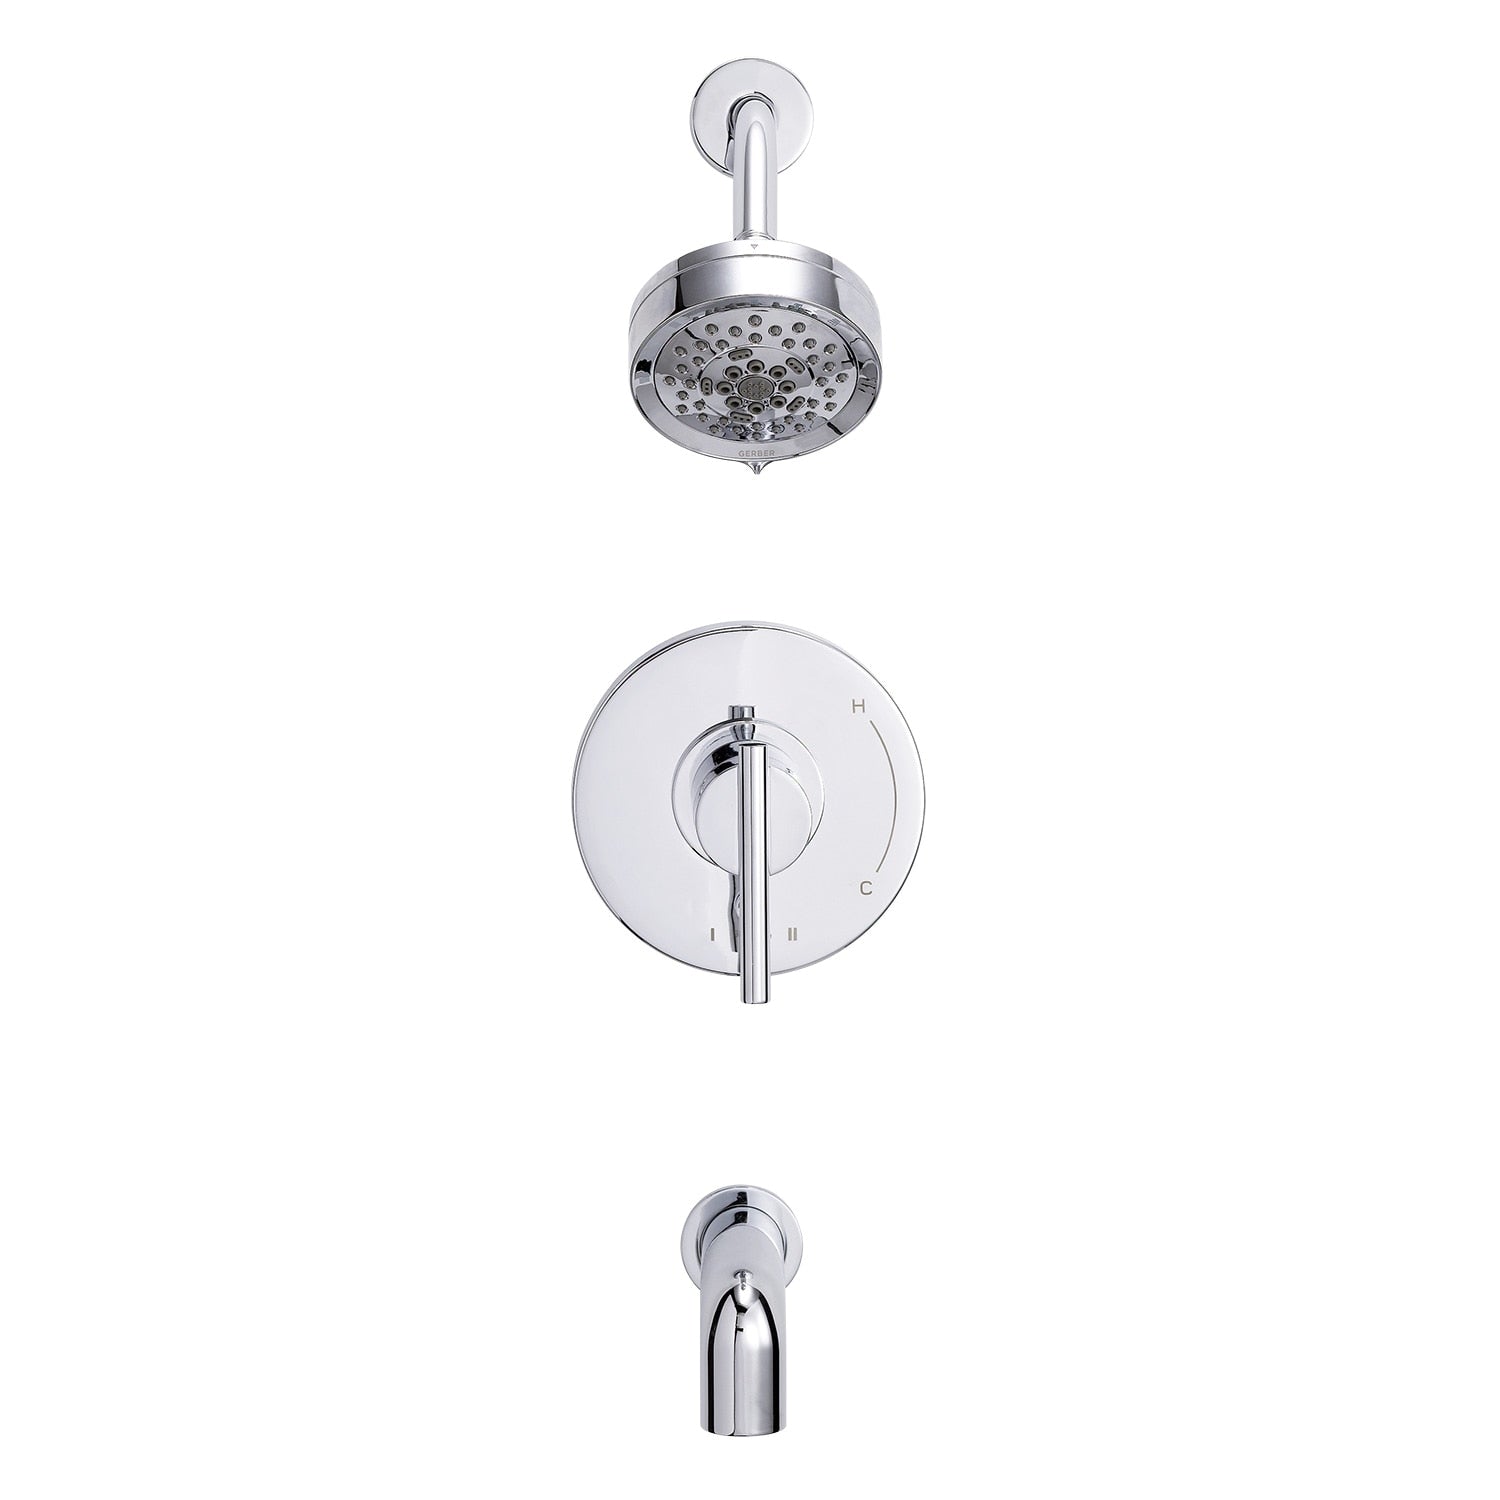 Danze by Gerber Parma 1H Tub and Shower Trim Kit and Treysta Cartridge w/ Diverter on Valve and 5 Function Showerhead 1.75gpm